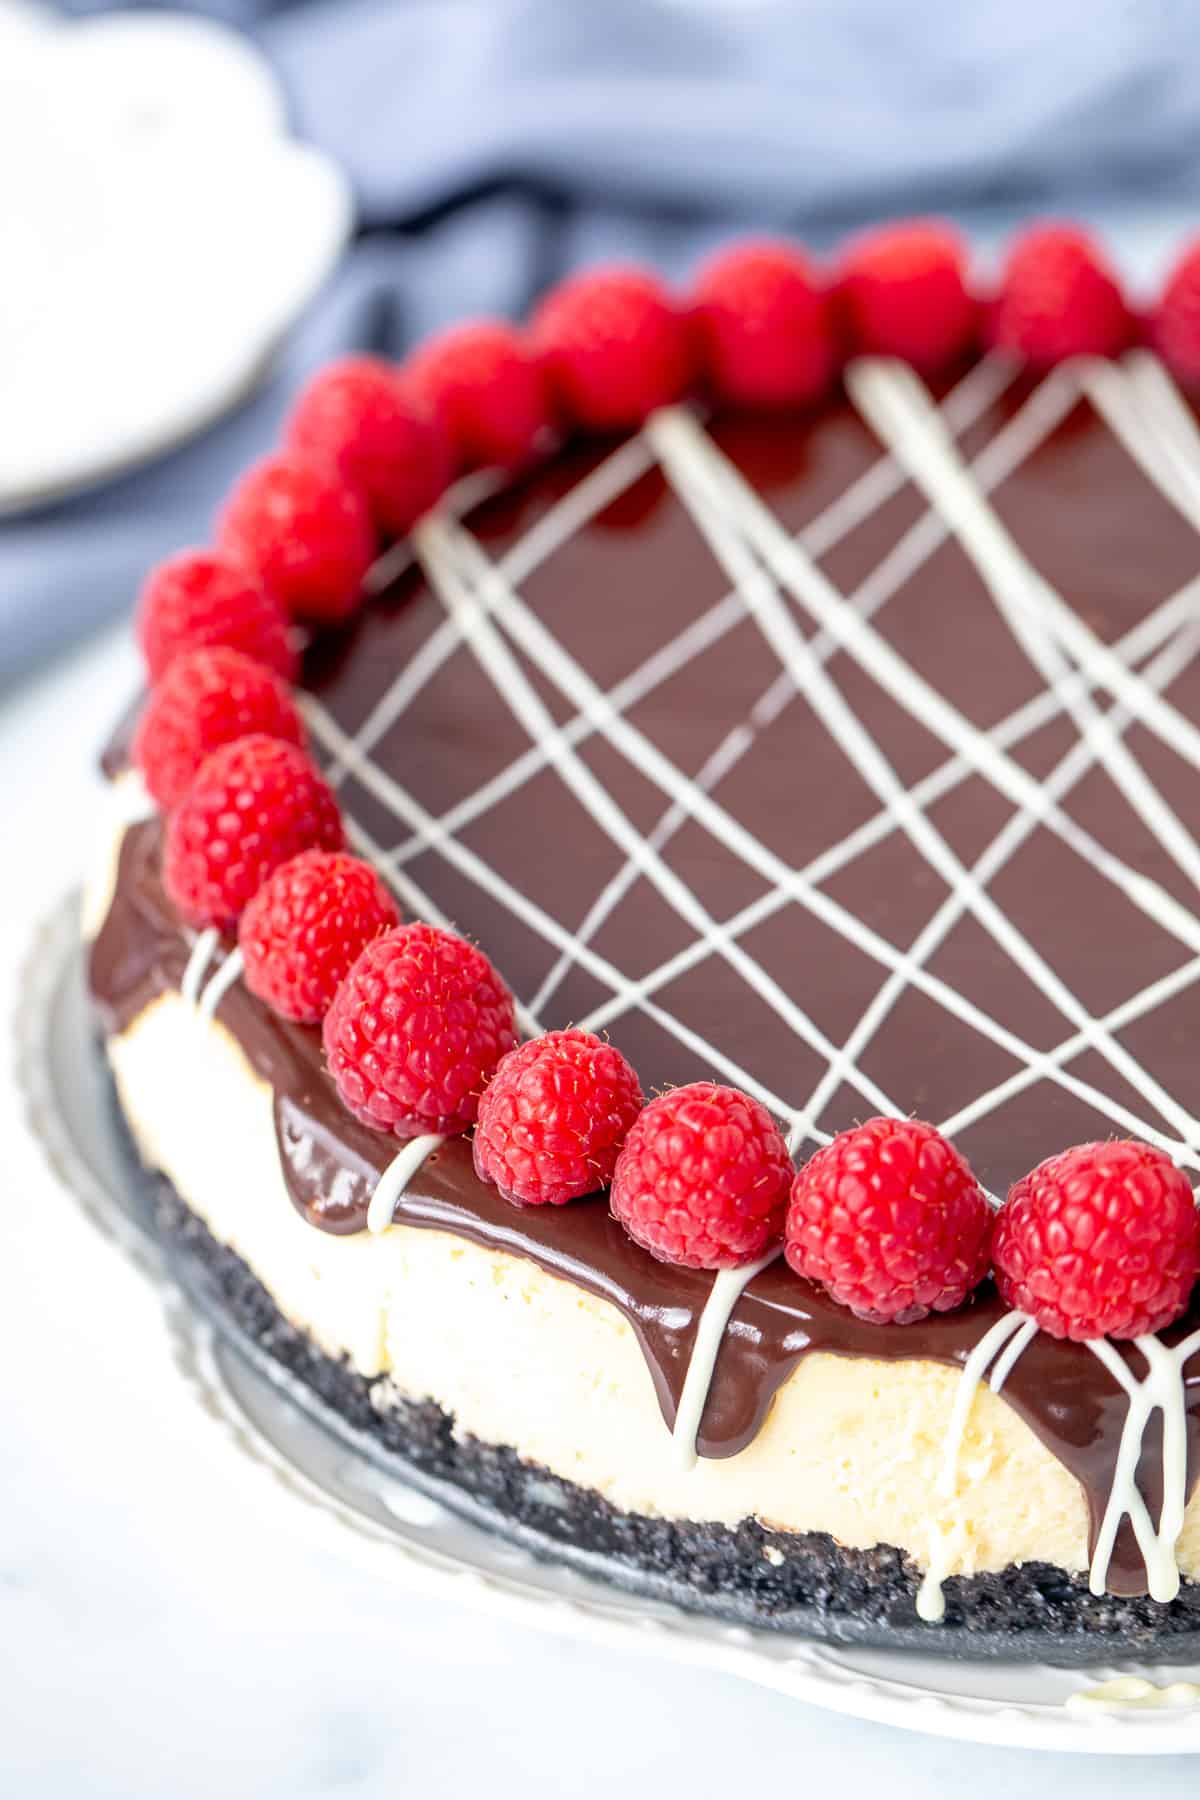 White chocolate cheesecake with chocolate topping, drizzle of white chocolate and reaspberries around the edges